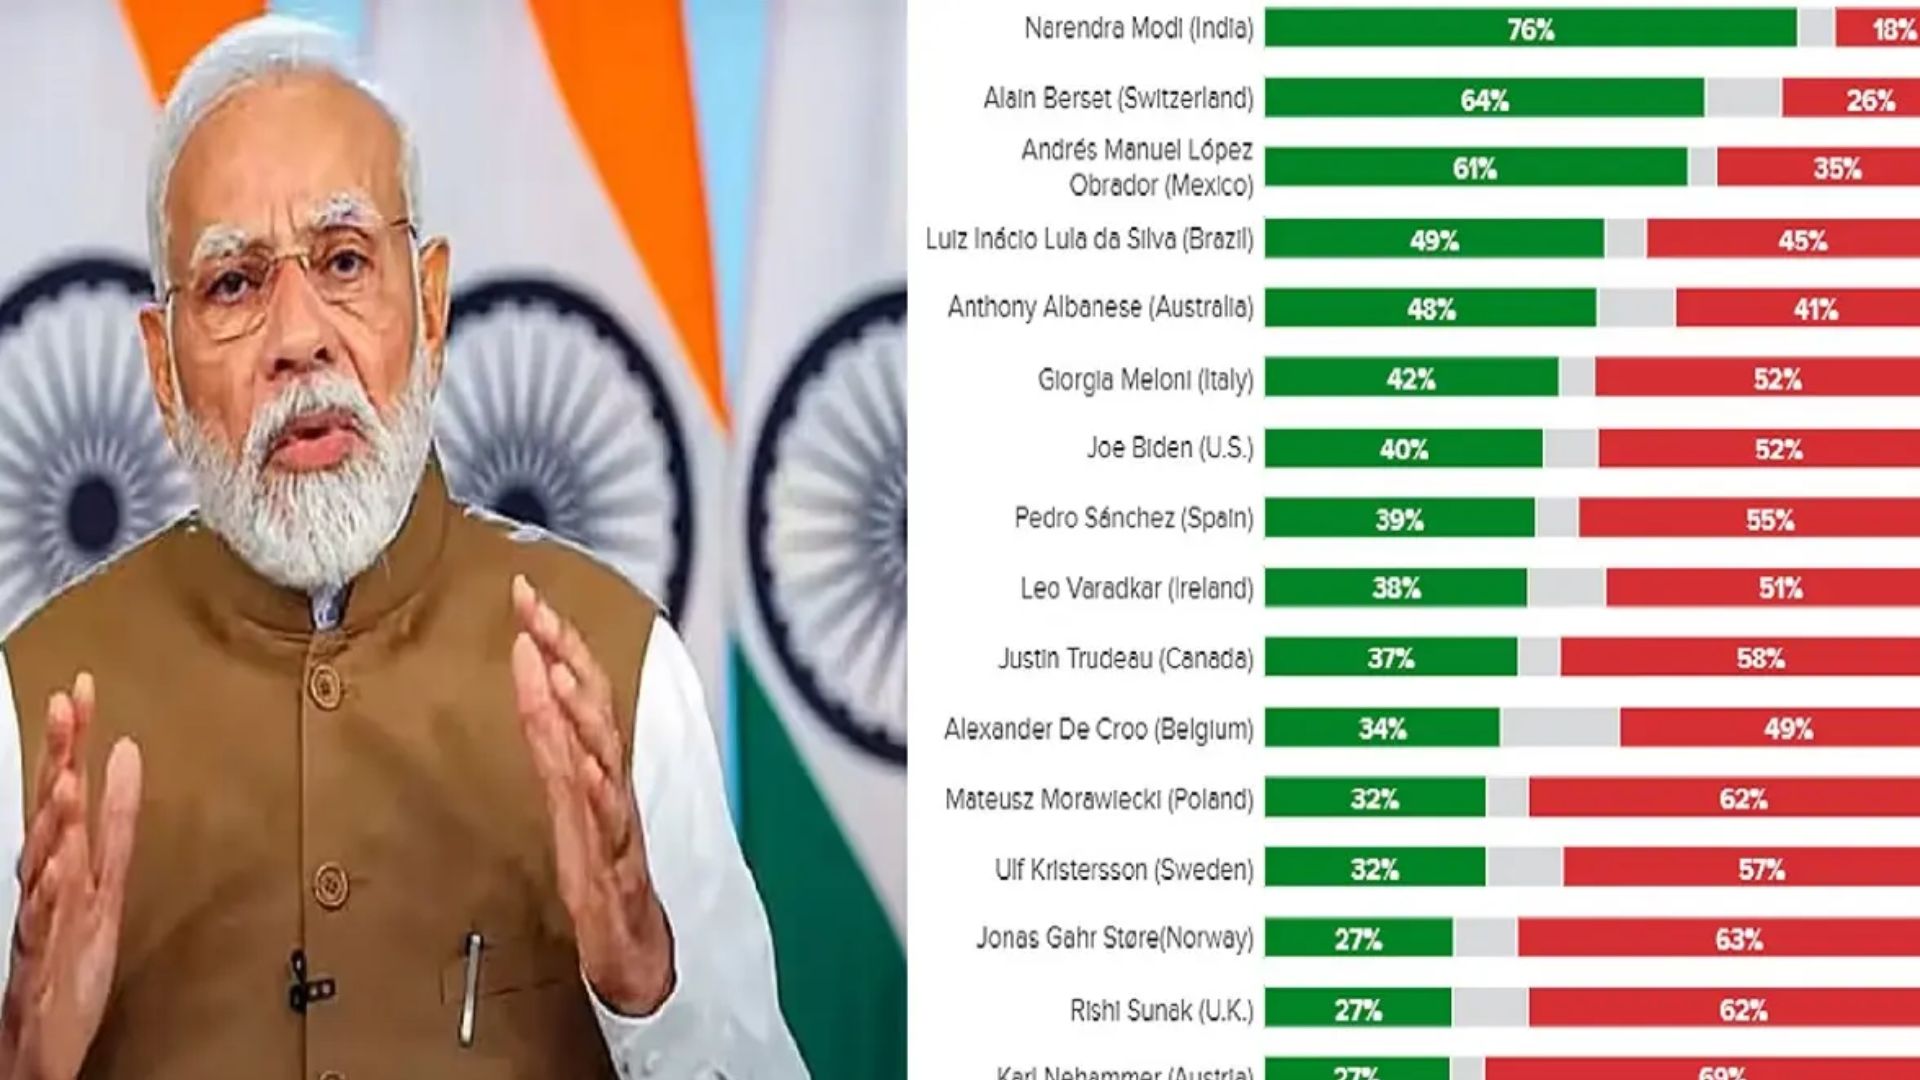 Morning Consult Survey Declares PM Modi as World’s Most Popular Leader with Staggering 78% Approval Ratings